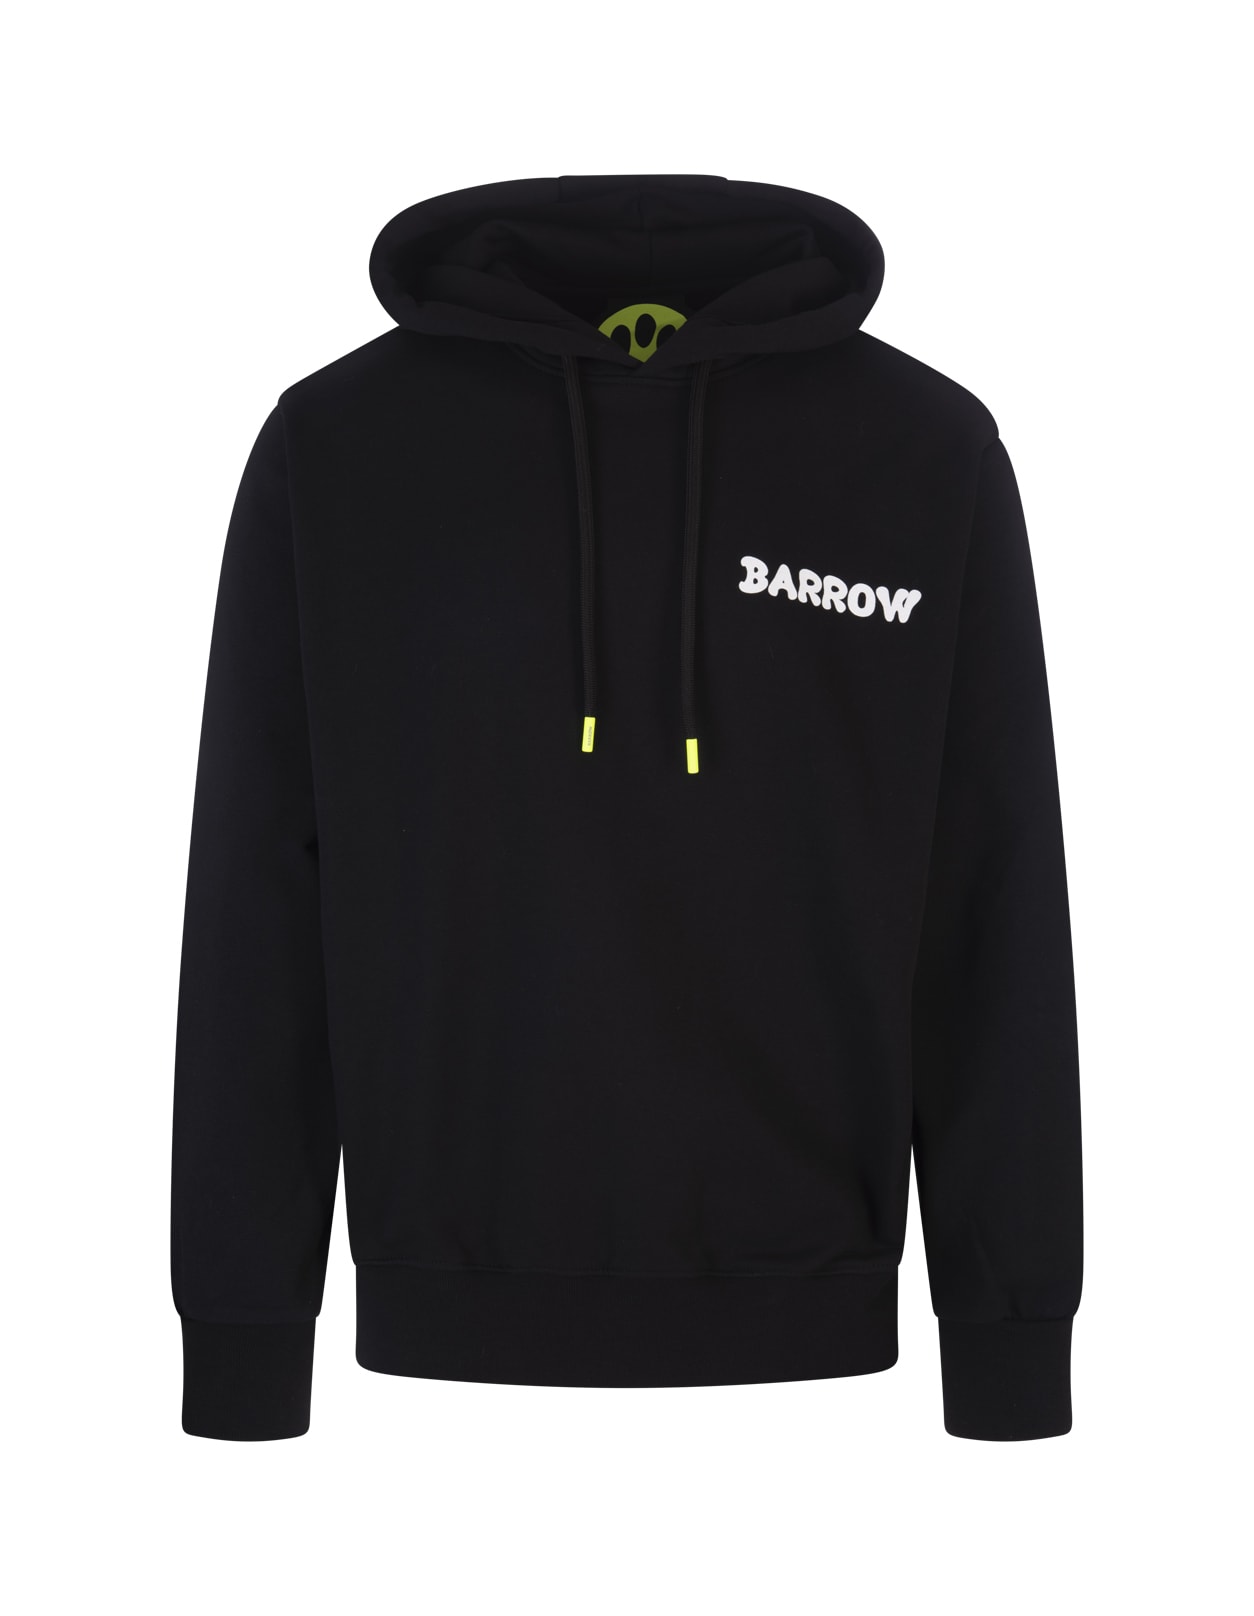 Barrow Unisex Black Hoodie With Logo And Multicolored Screen Printing On The Back